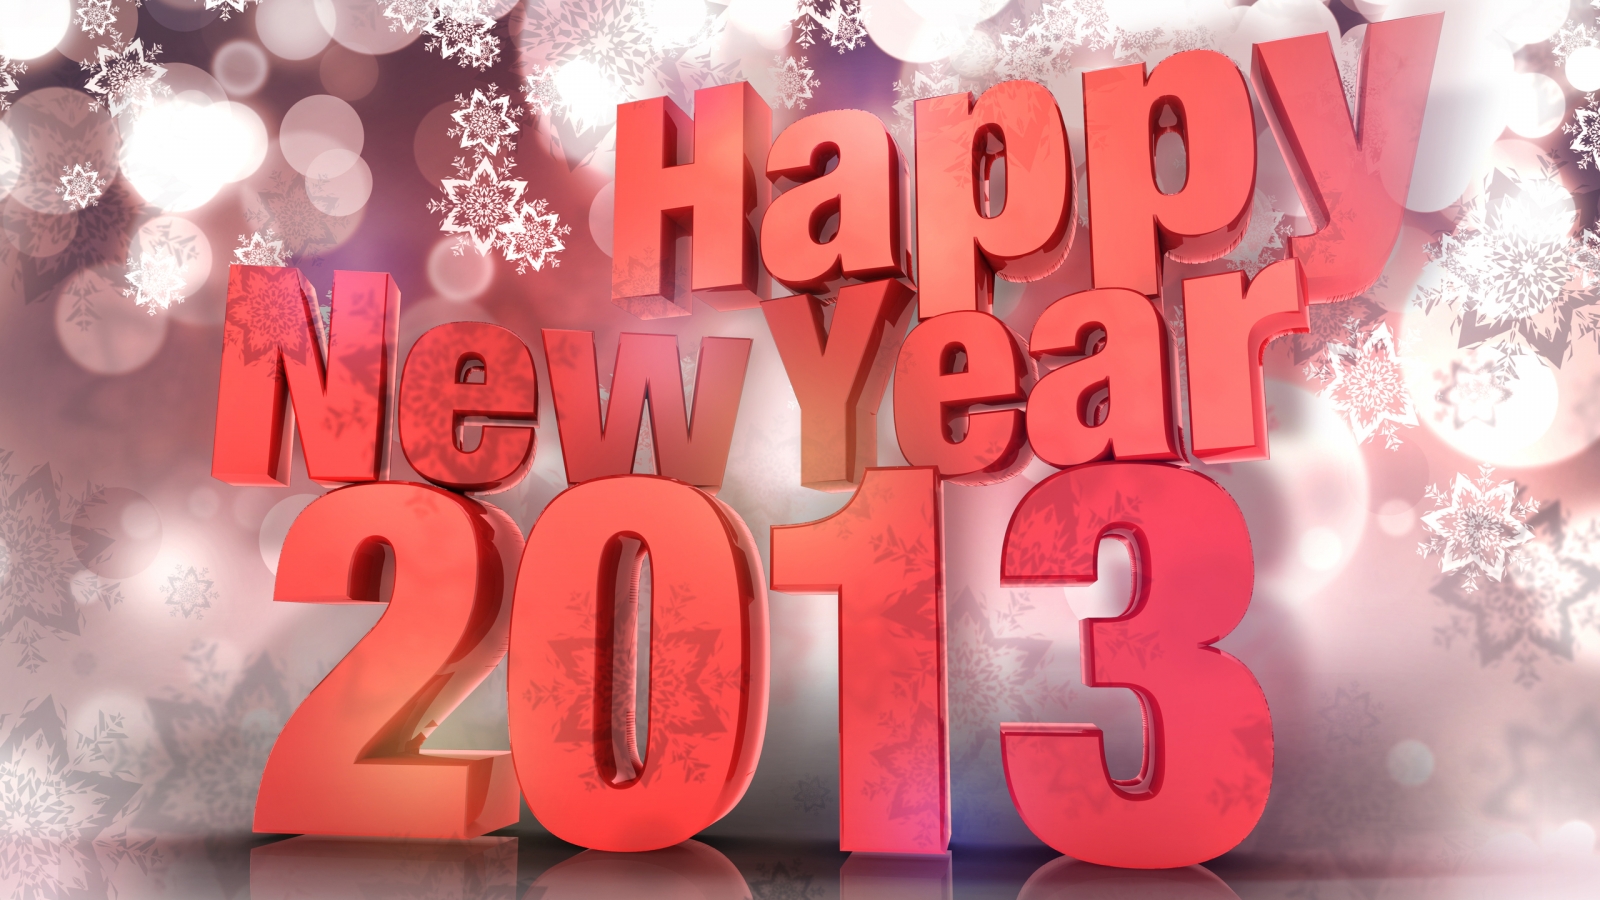 Happy New 2013 for 1600 x 900 HDTV resolution